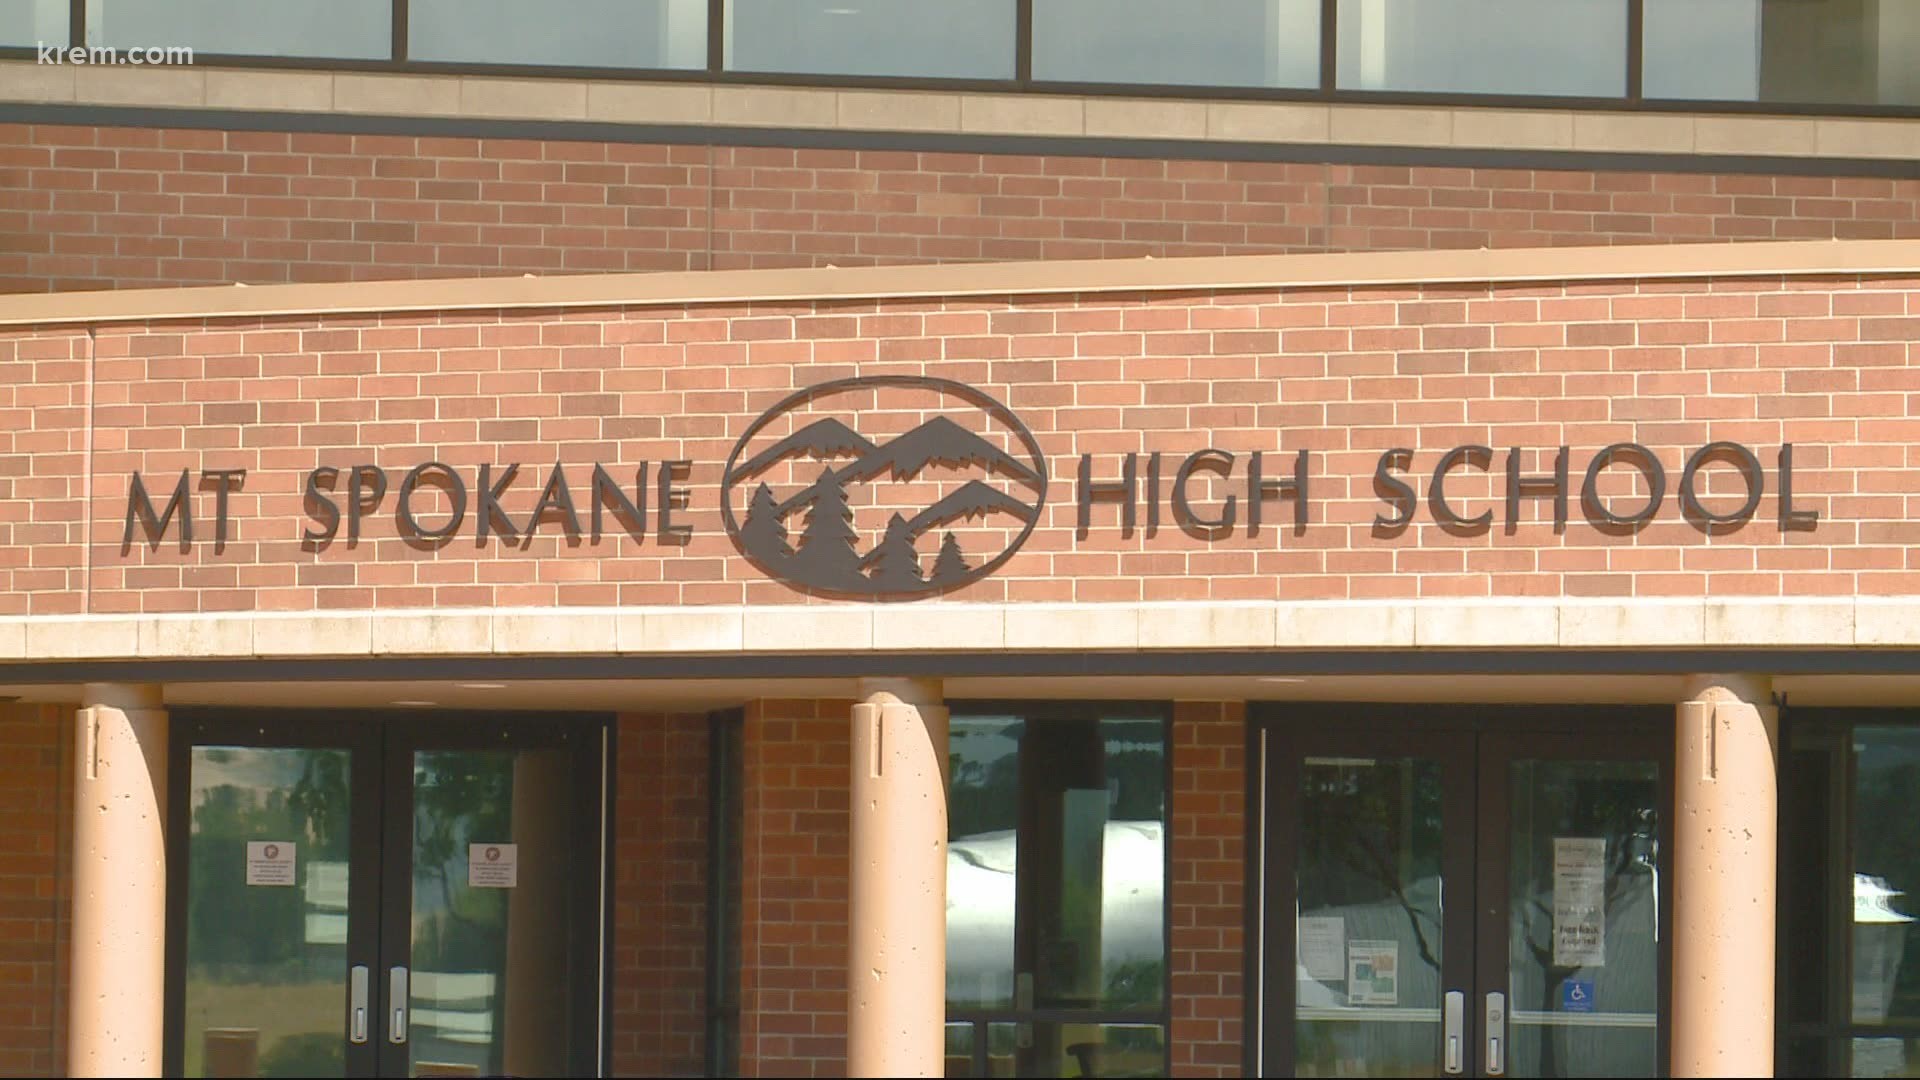 There are nine students and three staff members at Mt. Spokane High School who have had confirmed cases of coronavirus in the last two weeks.